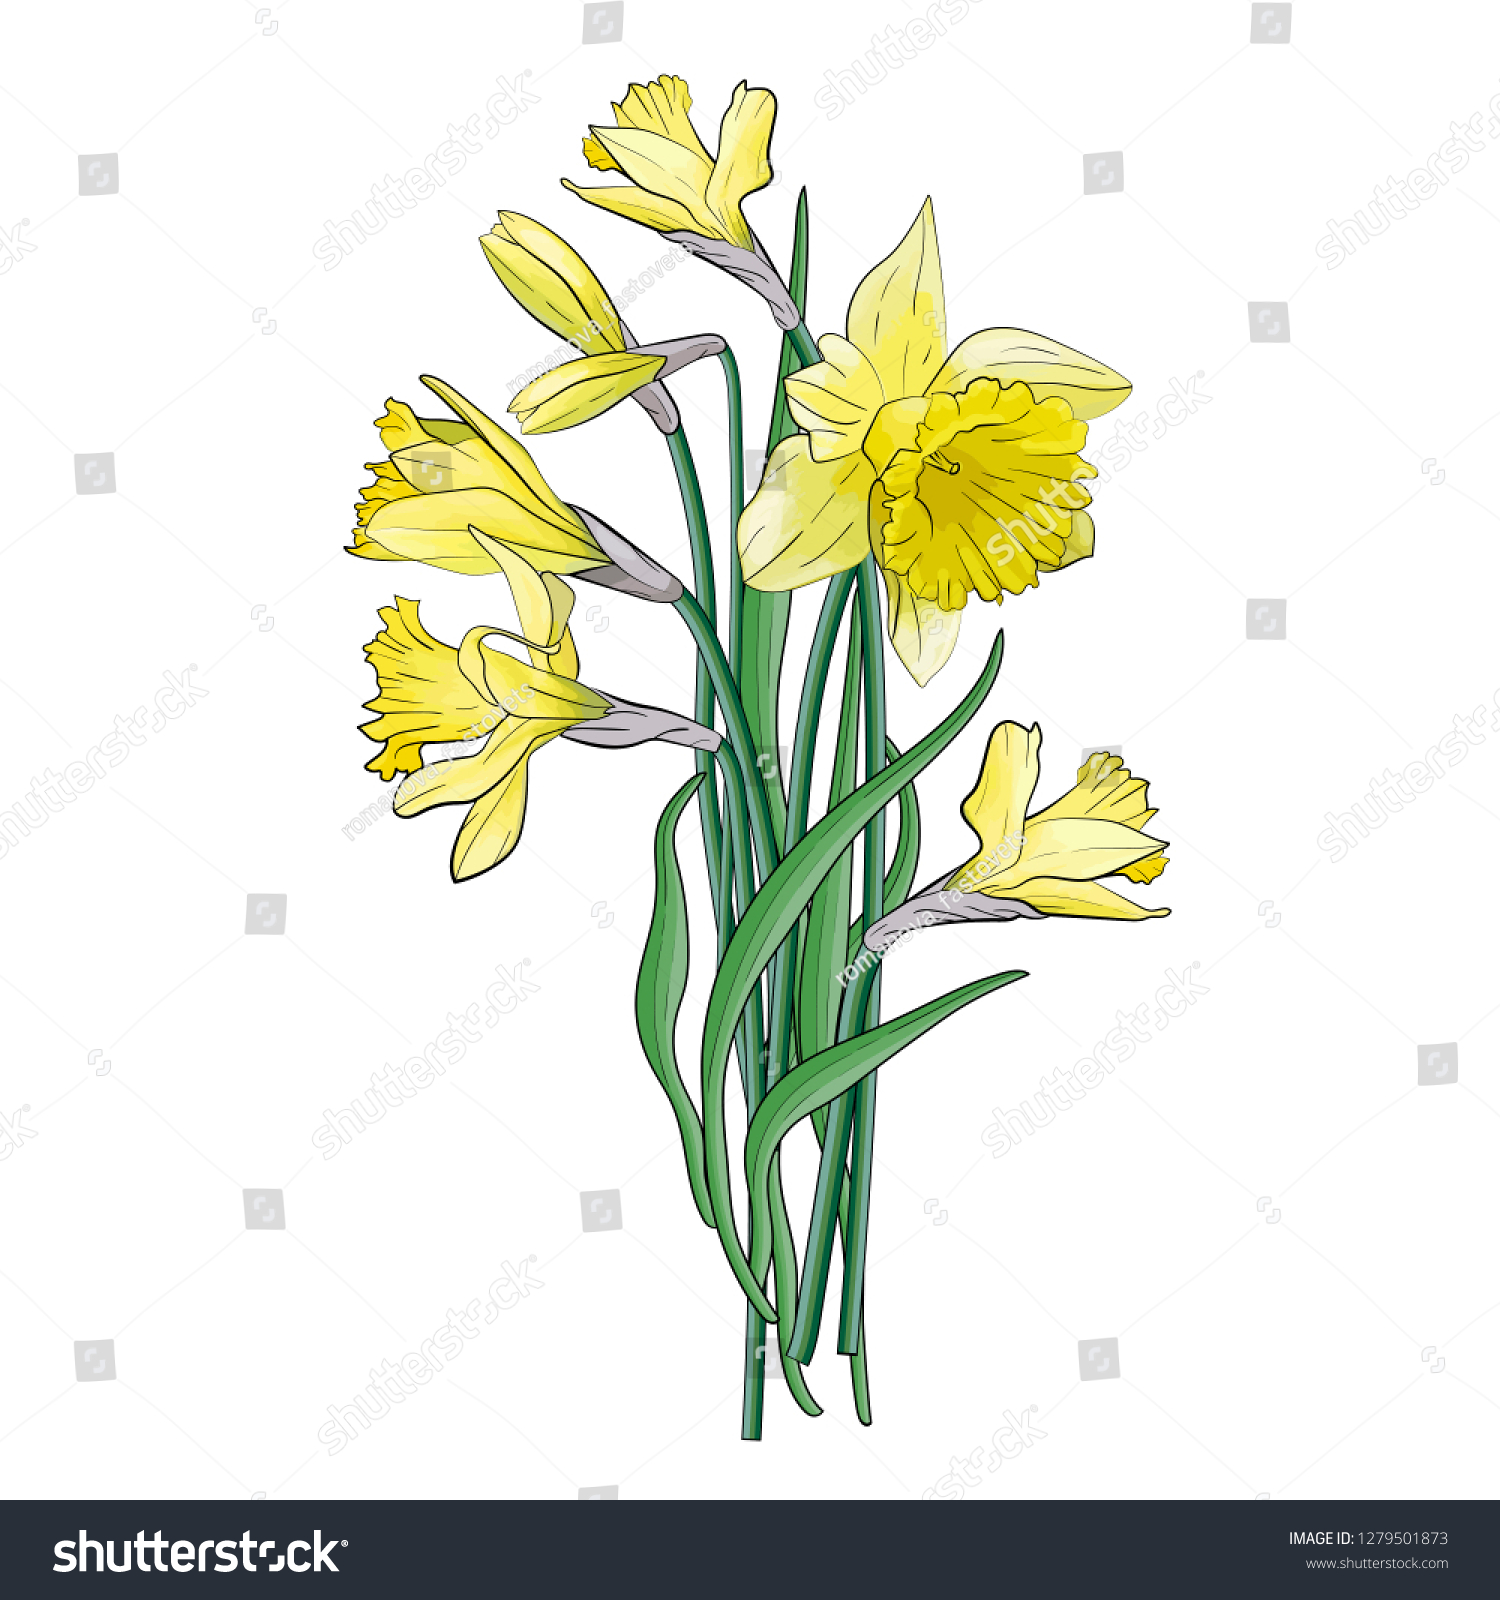 SVG of Bouquet of yellow narcissus with green leaves. Posters, textile etc. Cartoon narcissus vector illustration. Daffodil flower or narcissus isolated on white background cutout. Doodle svg